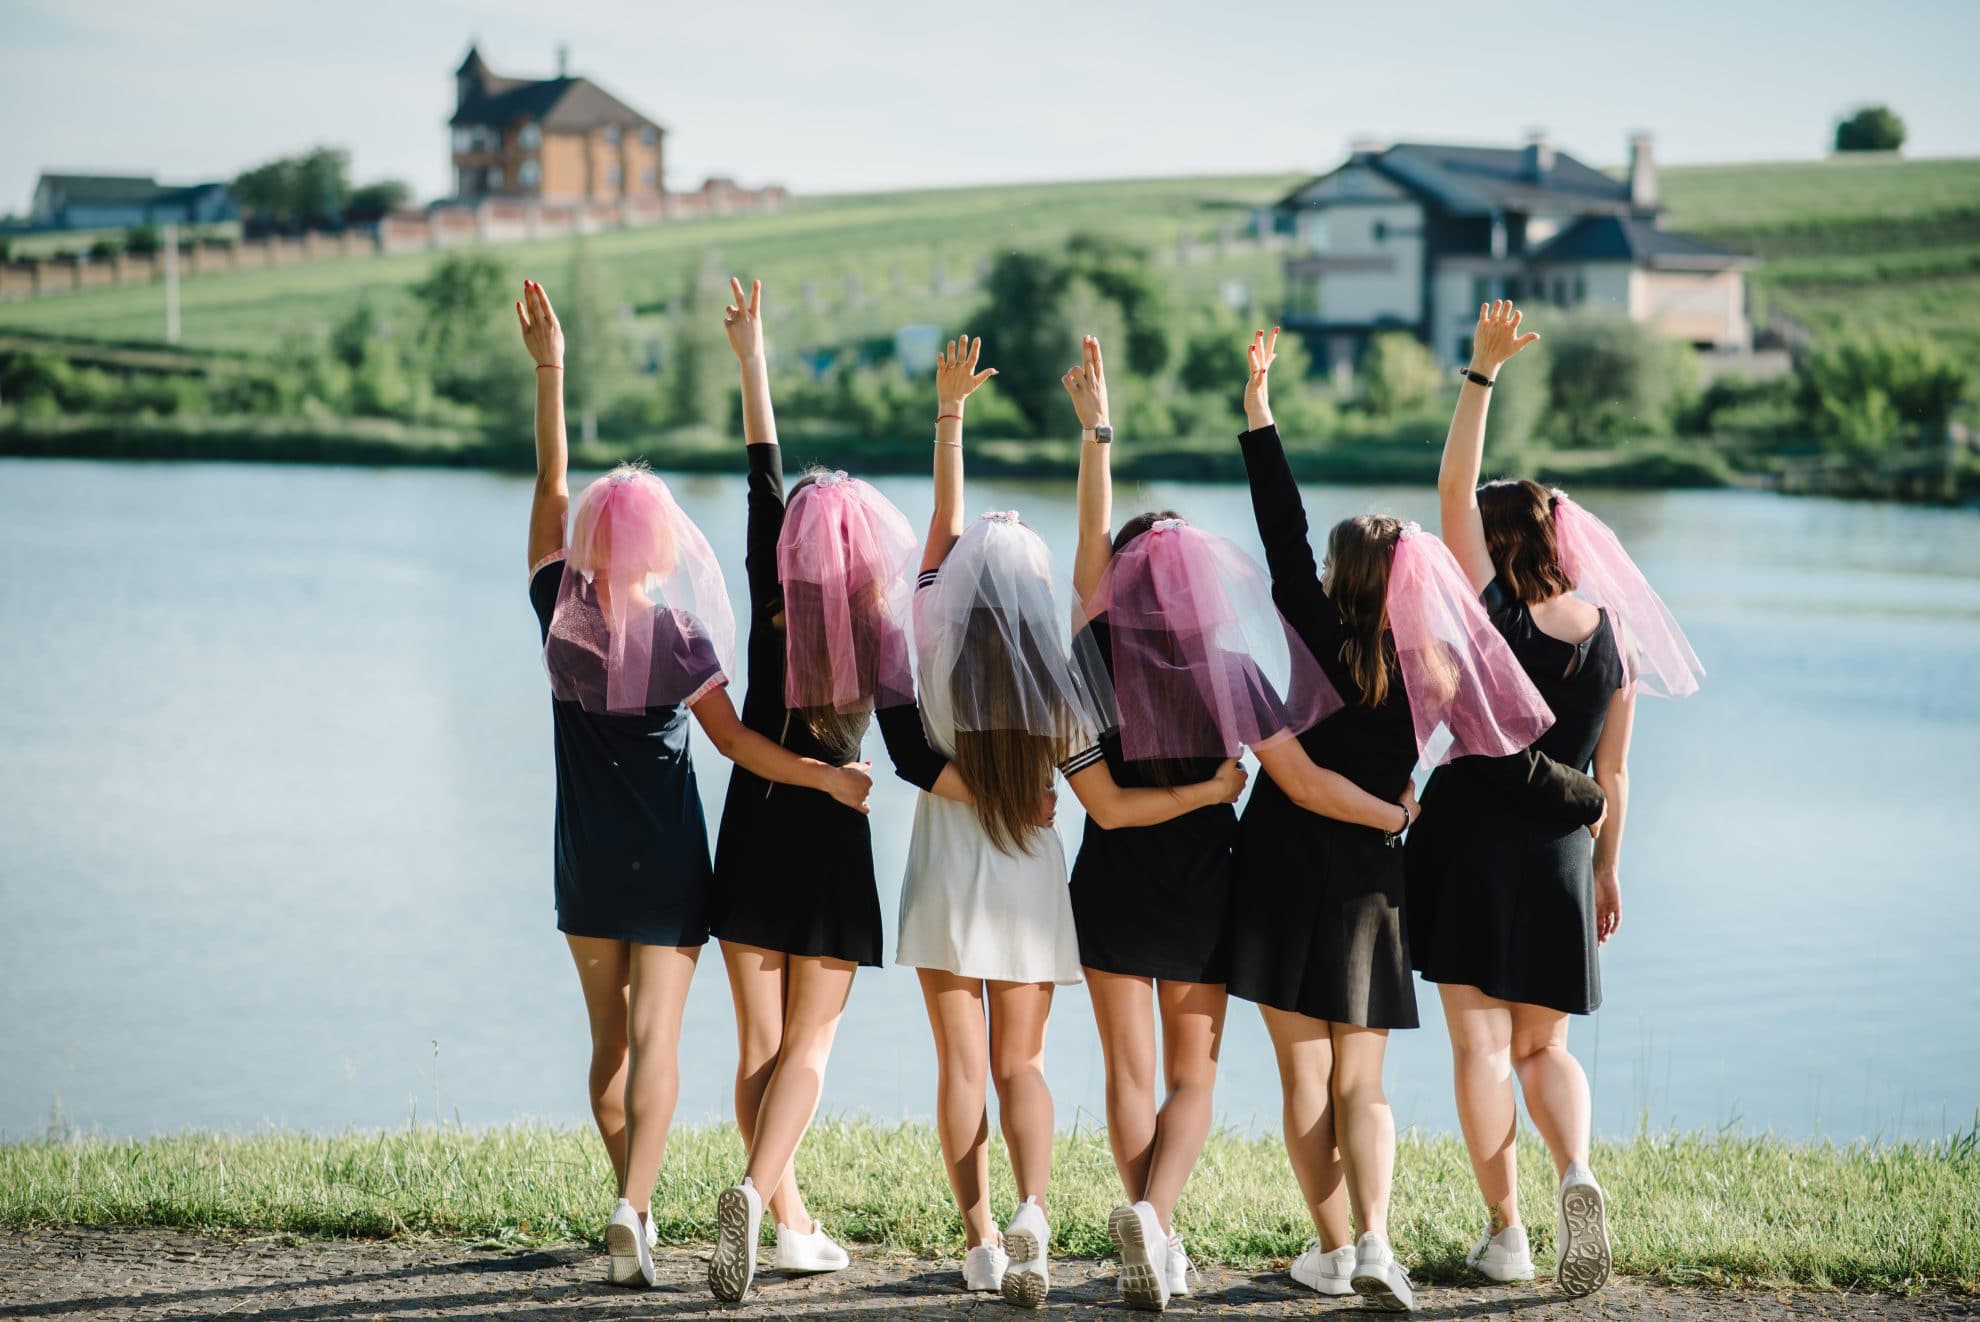 A bride and her hens pose in front of a lake. The bride is in a while outfit with a white veil while the others are in black outfits with pink veil. Image used in the 8 Hen Party Ideas for Every Type of Bride article.